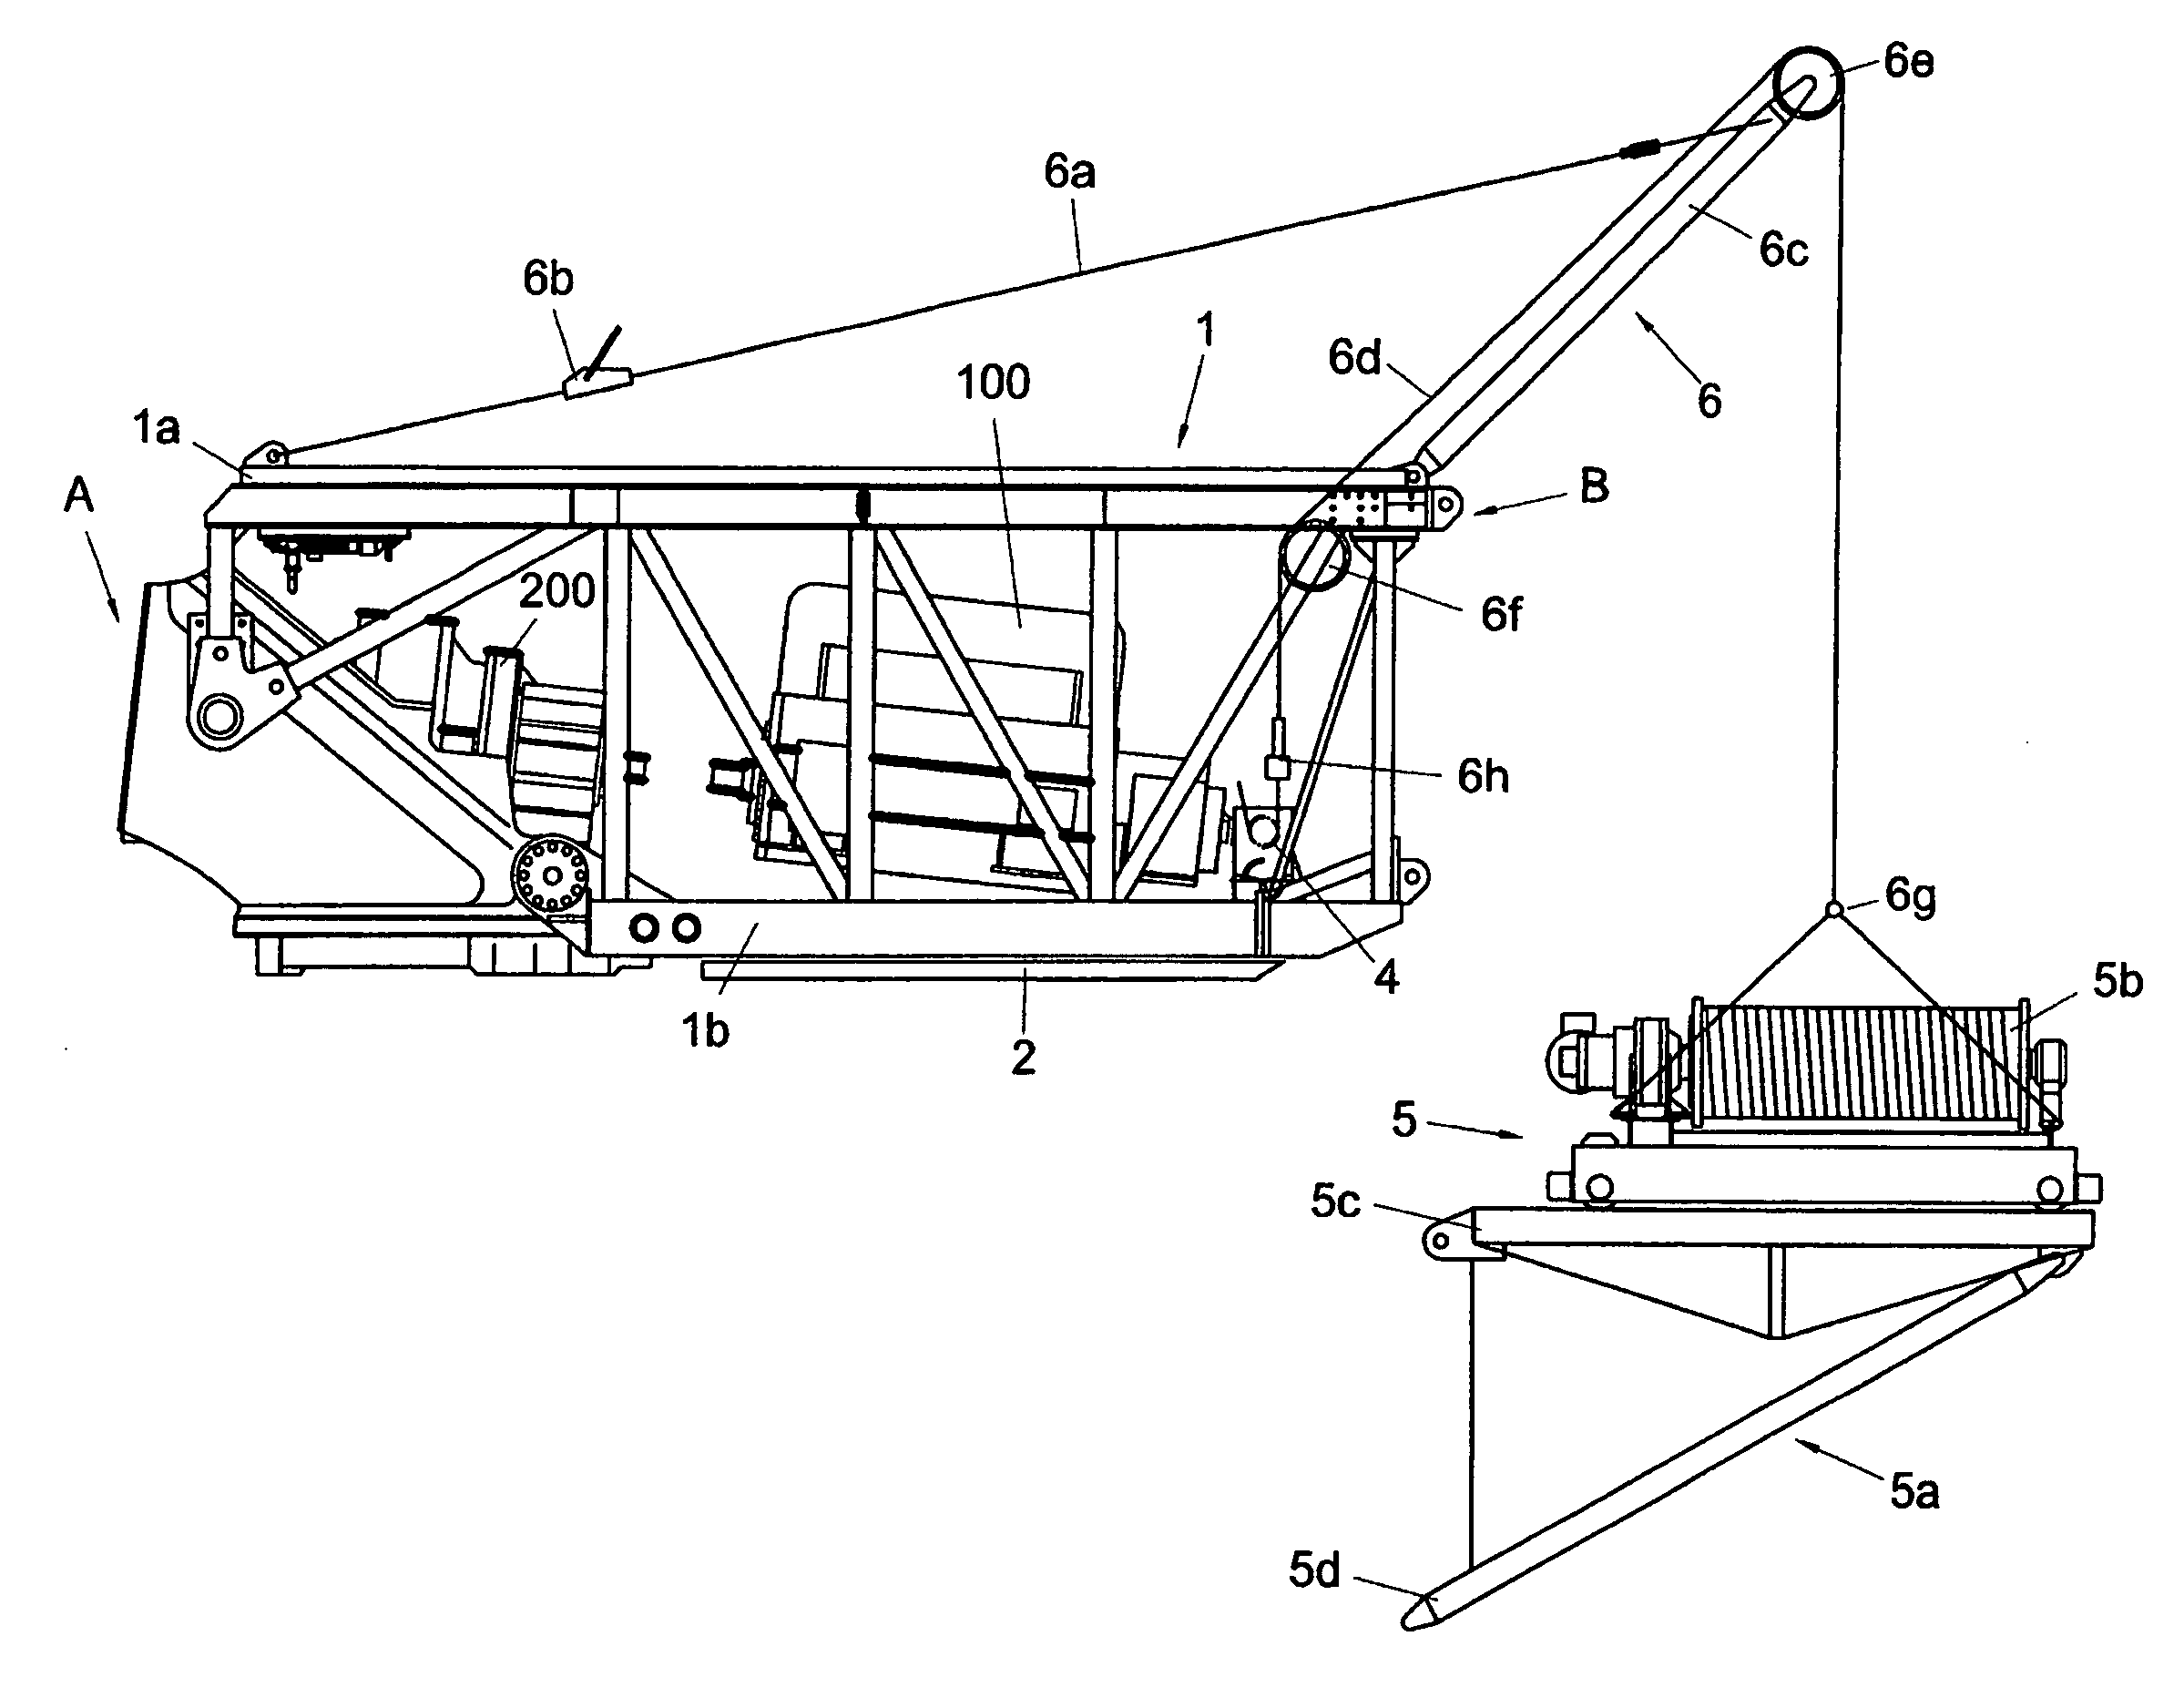 Method and system for performing operations on a wind turbine